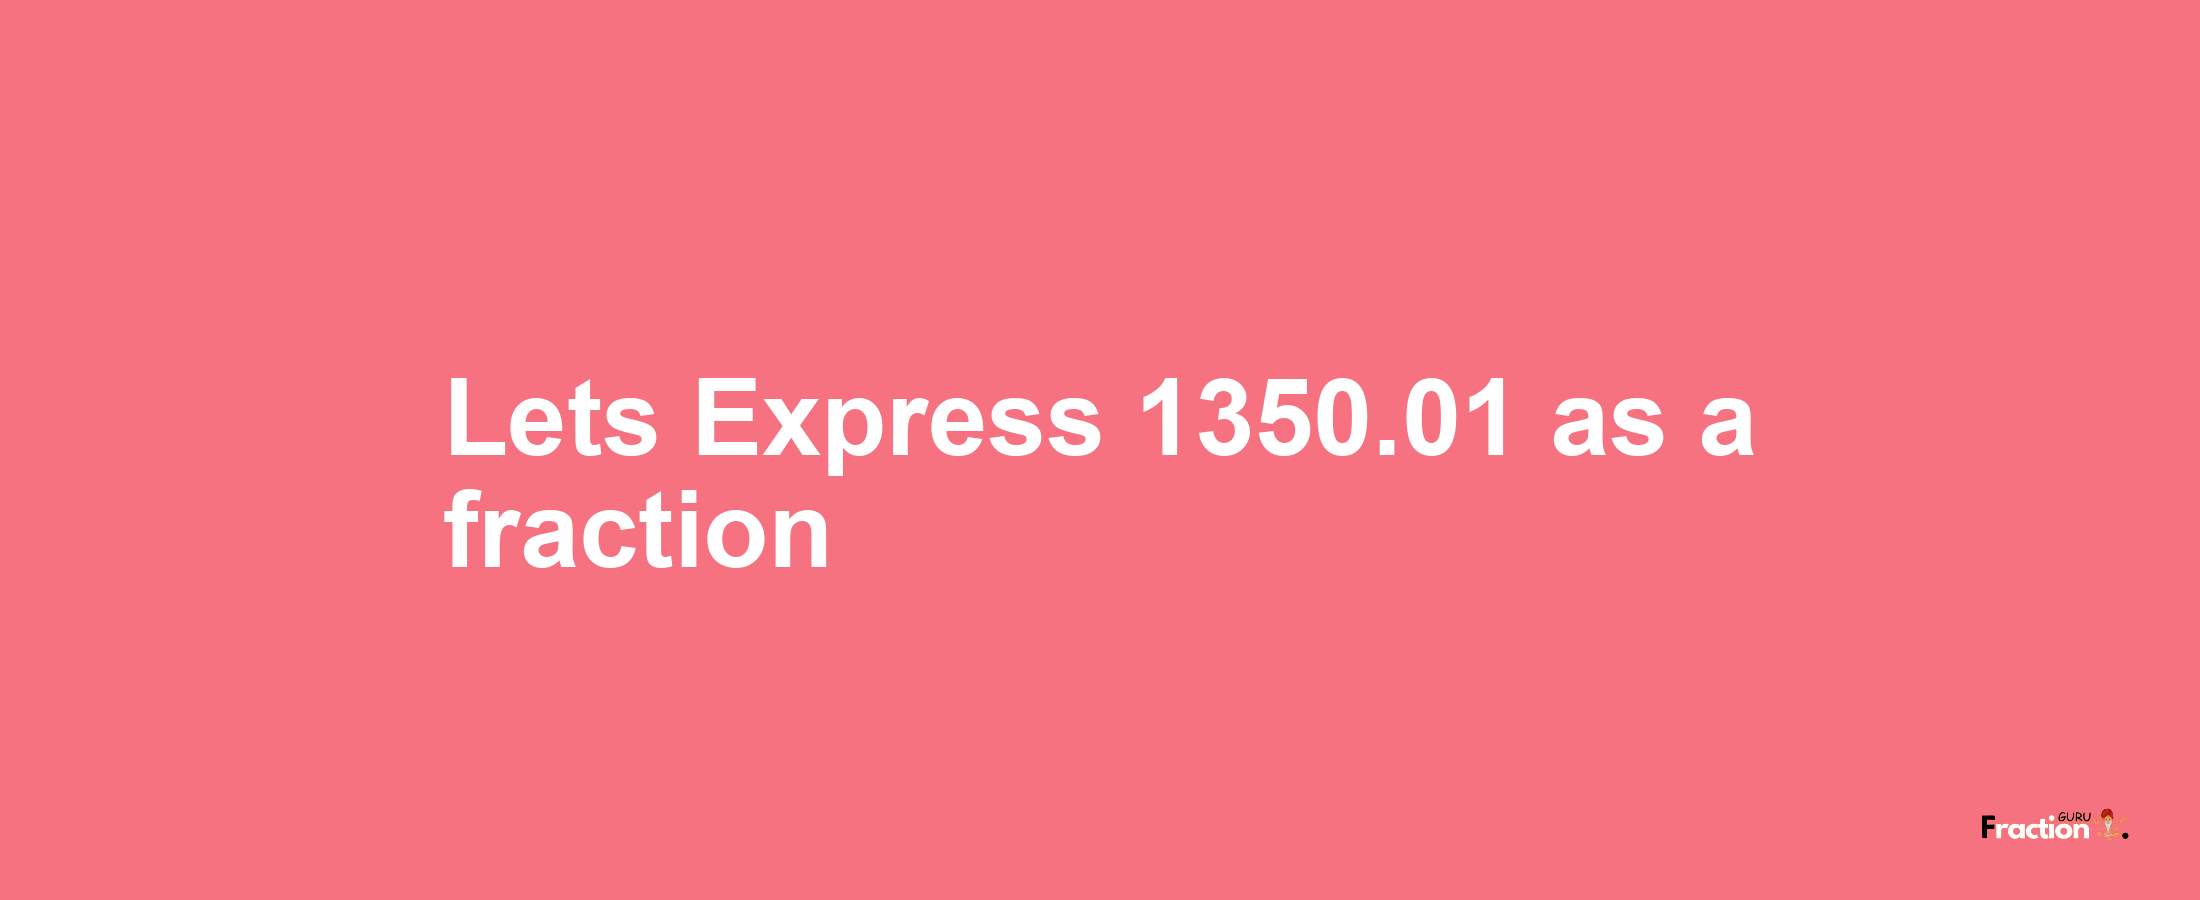 Lets Express 1350.01 as afraction